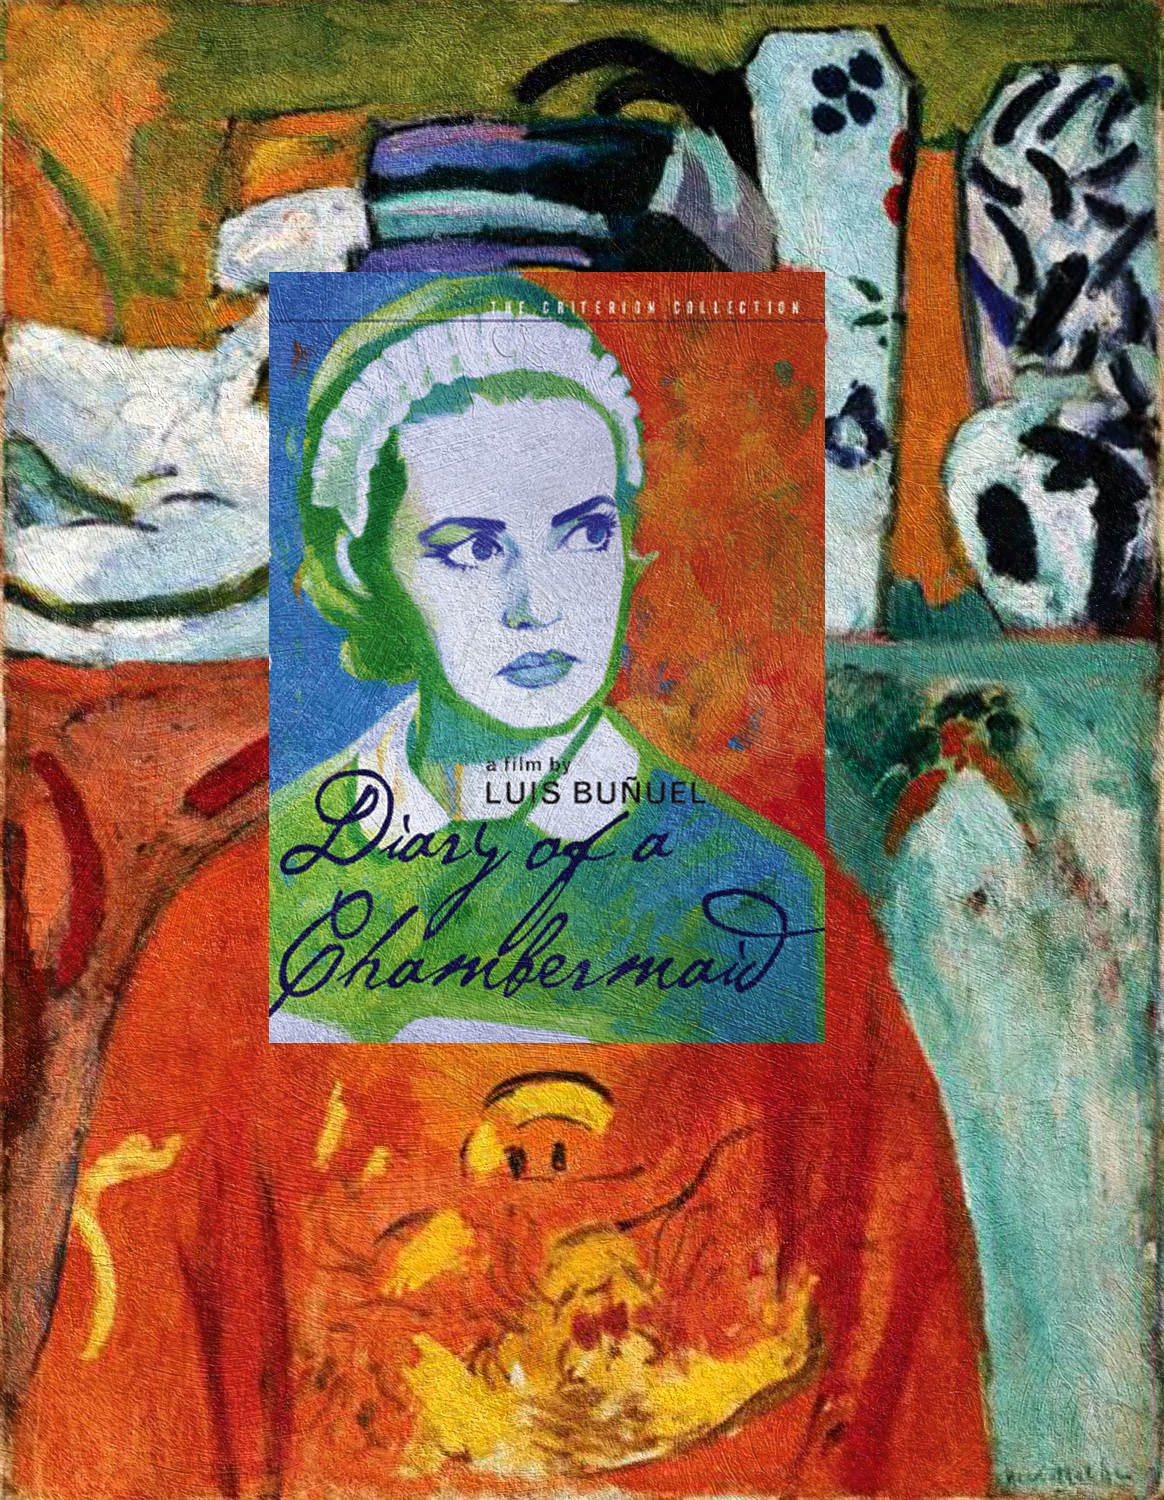 Diary of a Chambermaid by Luis Buñuel + The Girl with Green Eyes by Henri Matisse